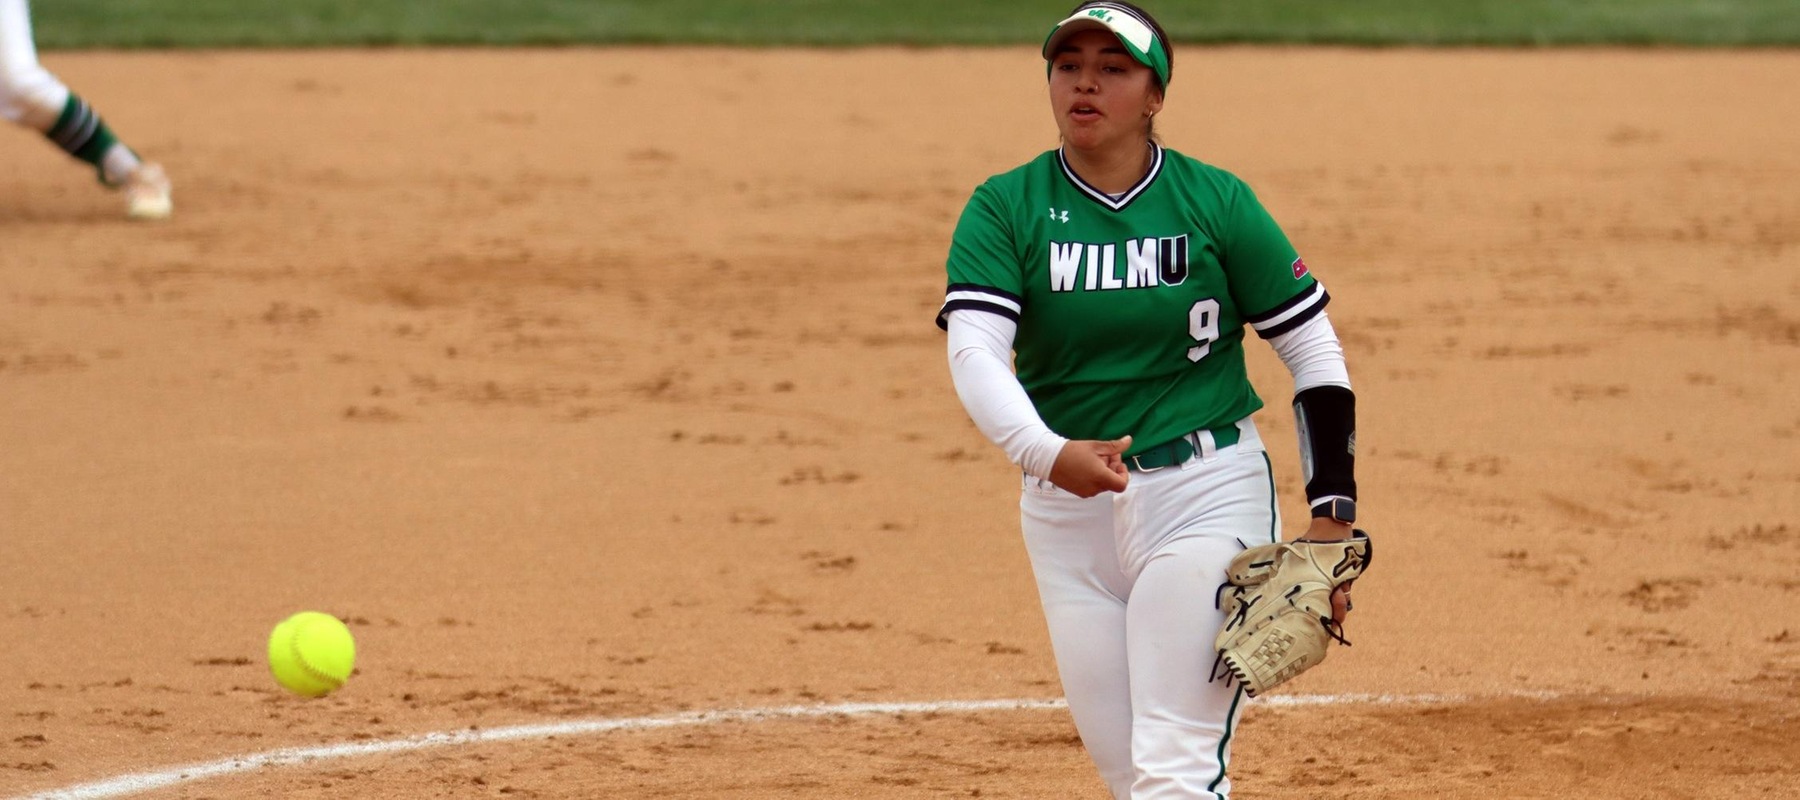 File photo of Renamarie Rocha who came on in relief in game two and tossed three scoreless innings for the win against Molloy. Copyright 2022; Wilmington University. All rights reserved. Photo by Dan Lauletta. March 31, 2022 vs. Felician.